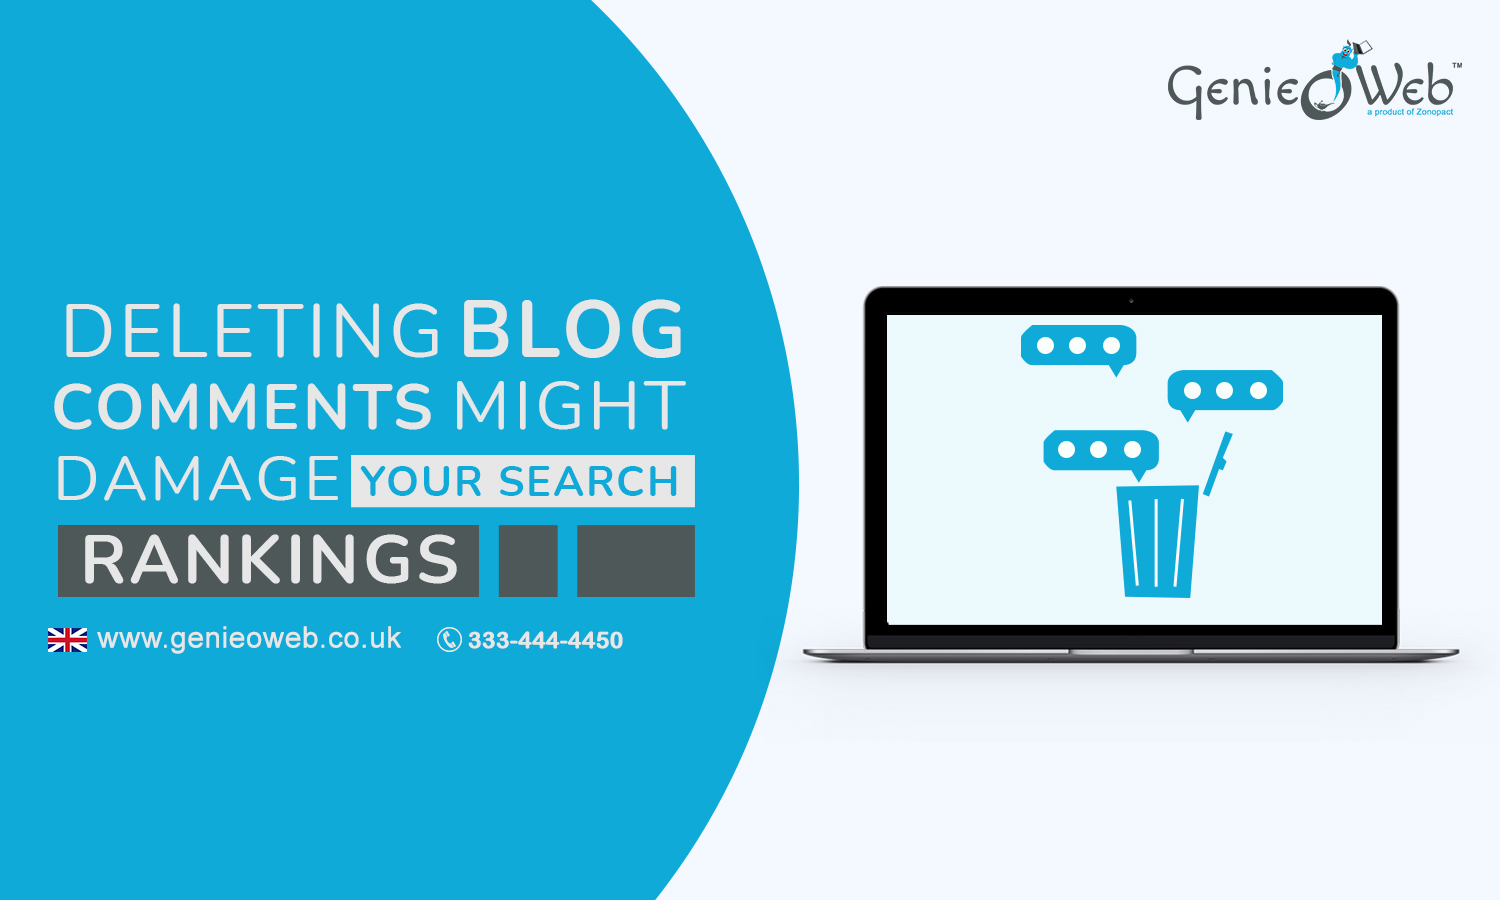 Deleting Blog Comments Might Damage Your Search Rankings